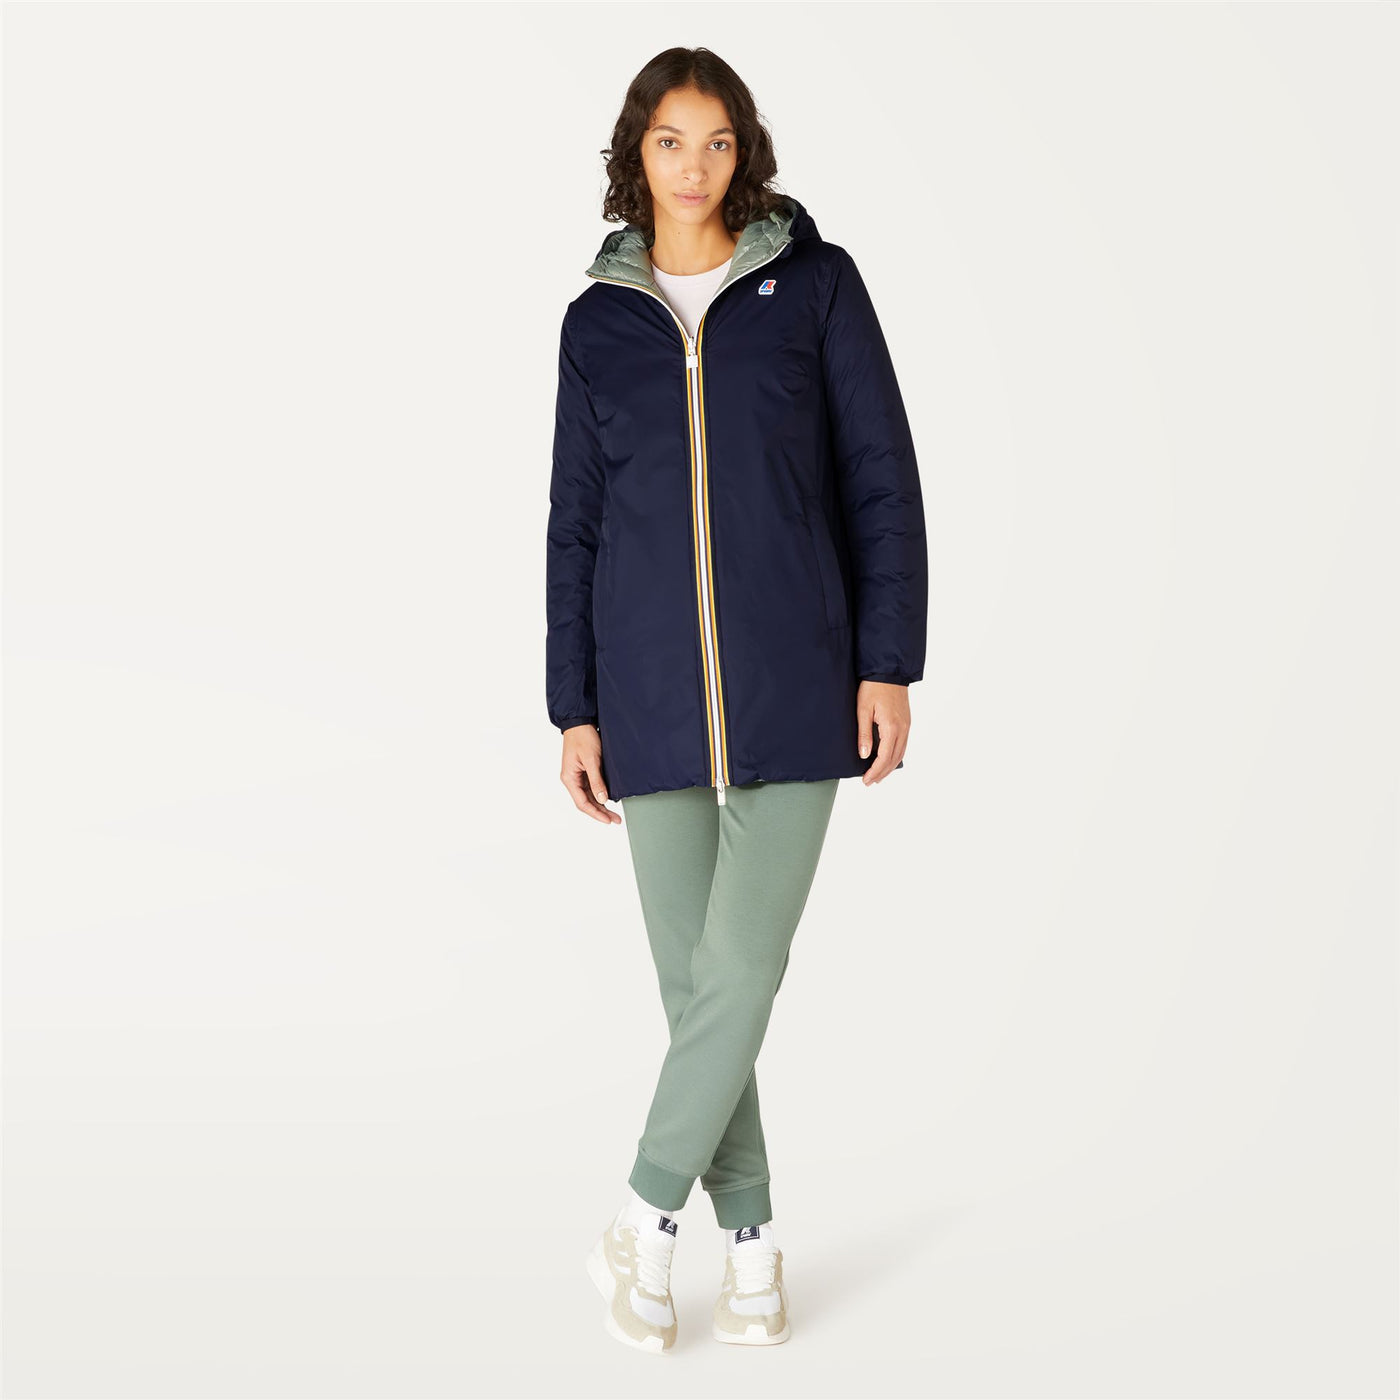 Jackets Woman SOPHIE THERMO PLUS.2 DOUBLE Mid BLUE DEPTH - GREEN LAUREL Dressed Back (jpg Rgb)		